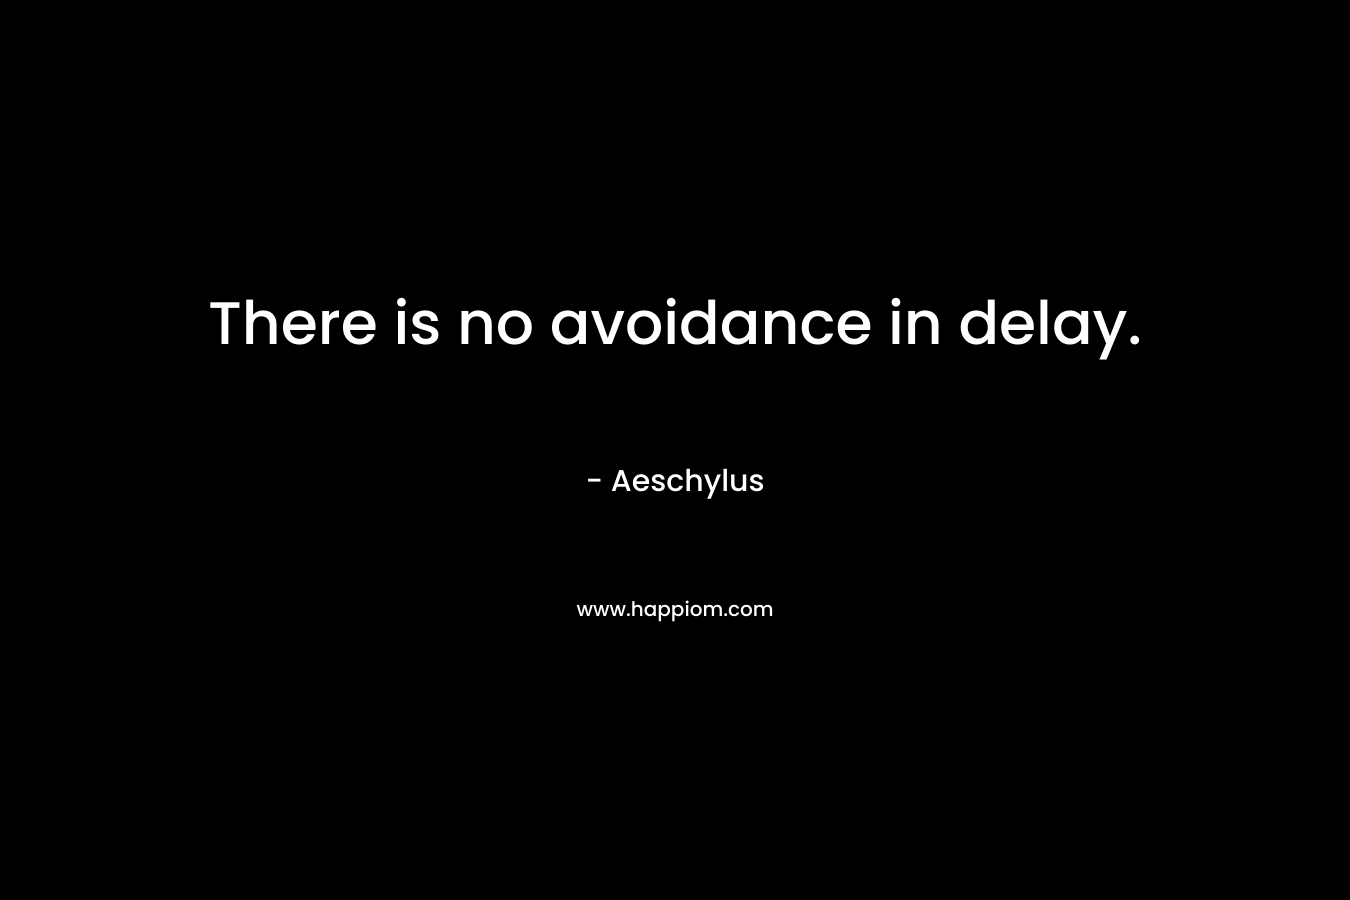 There is no avoidance in delay.